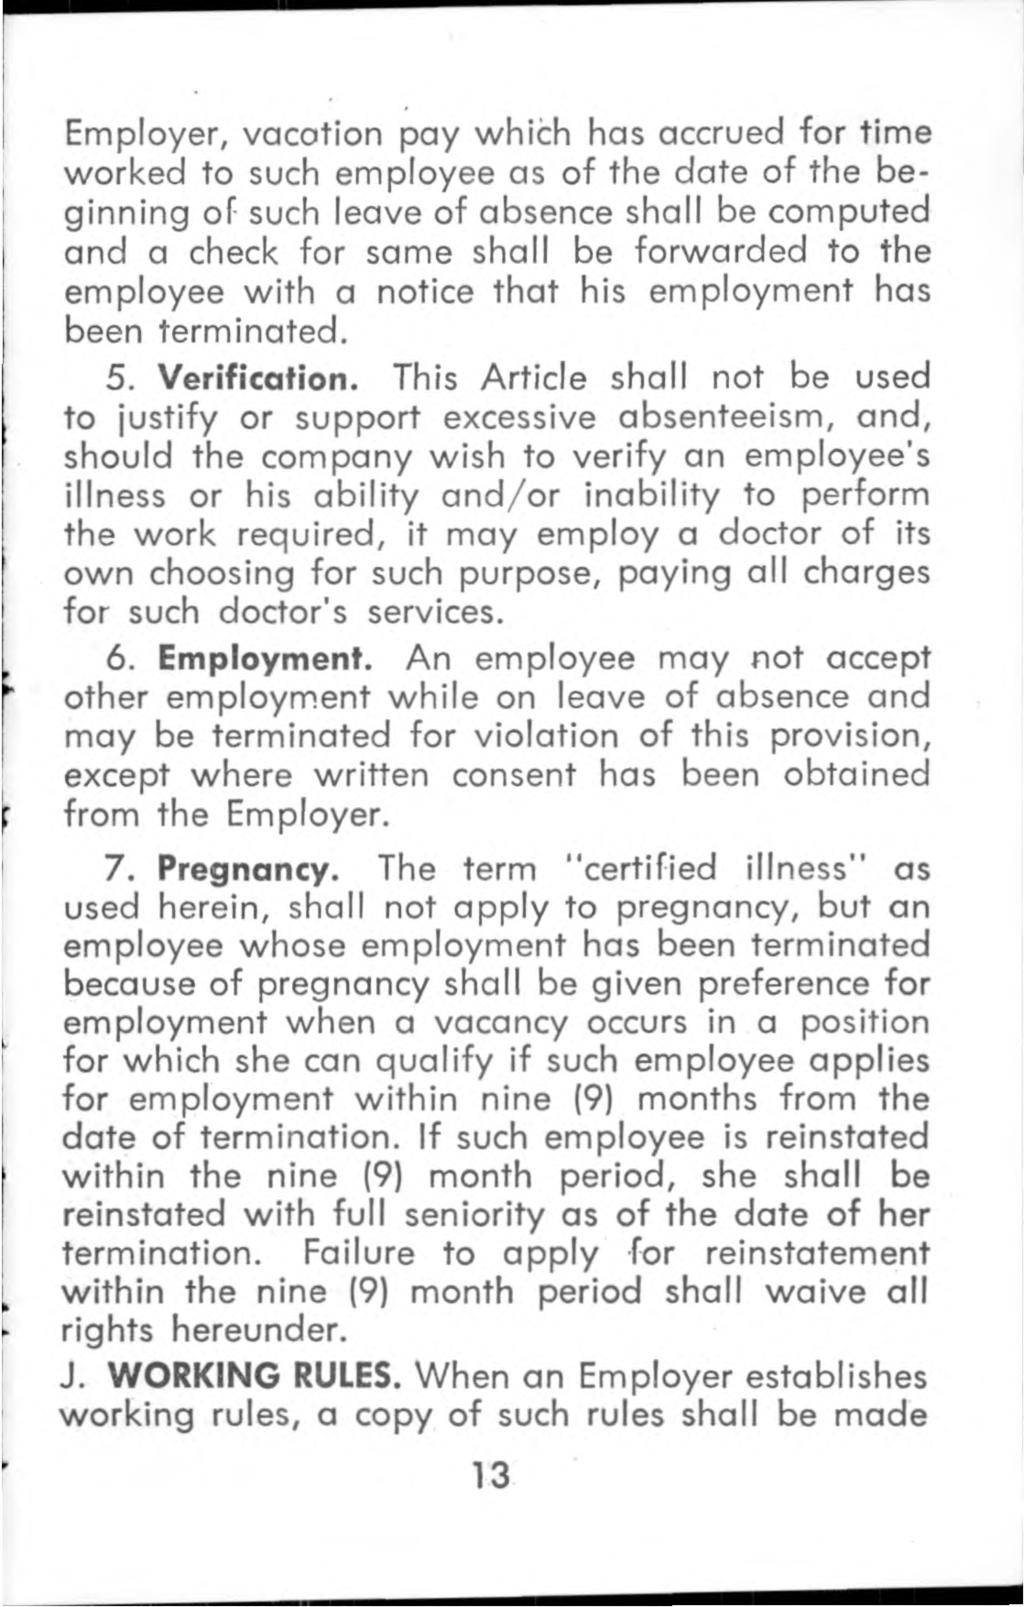 Employer, vacotion pay which has accrued fo r tim e w orked to such employee as o f the date o f the beginning o f such leave of absence shall be computed and a check for same shall be forw arded to